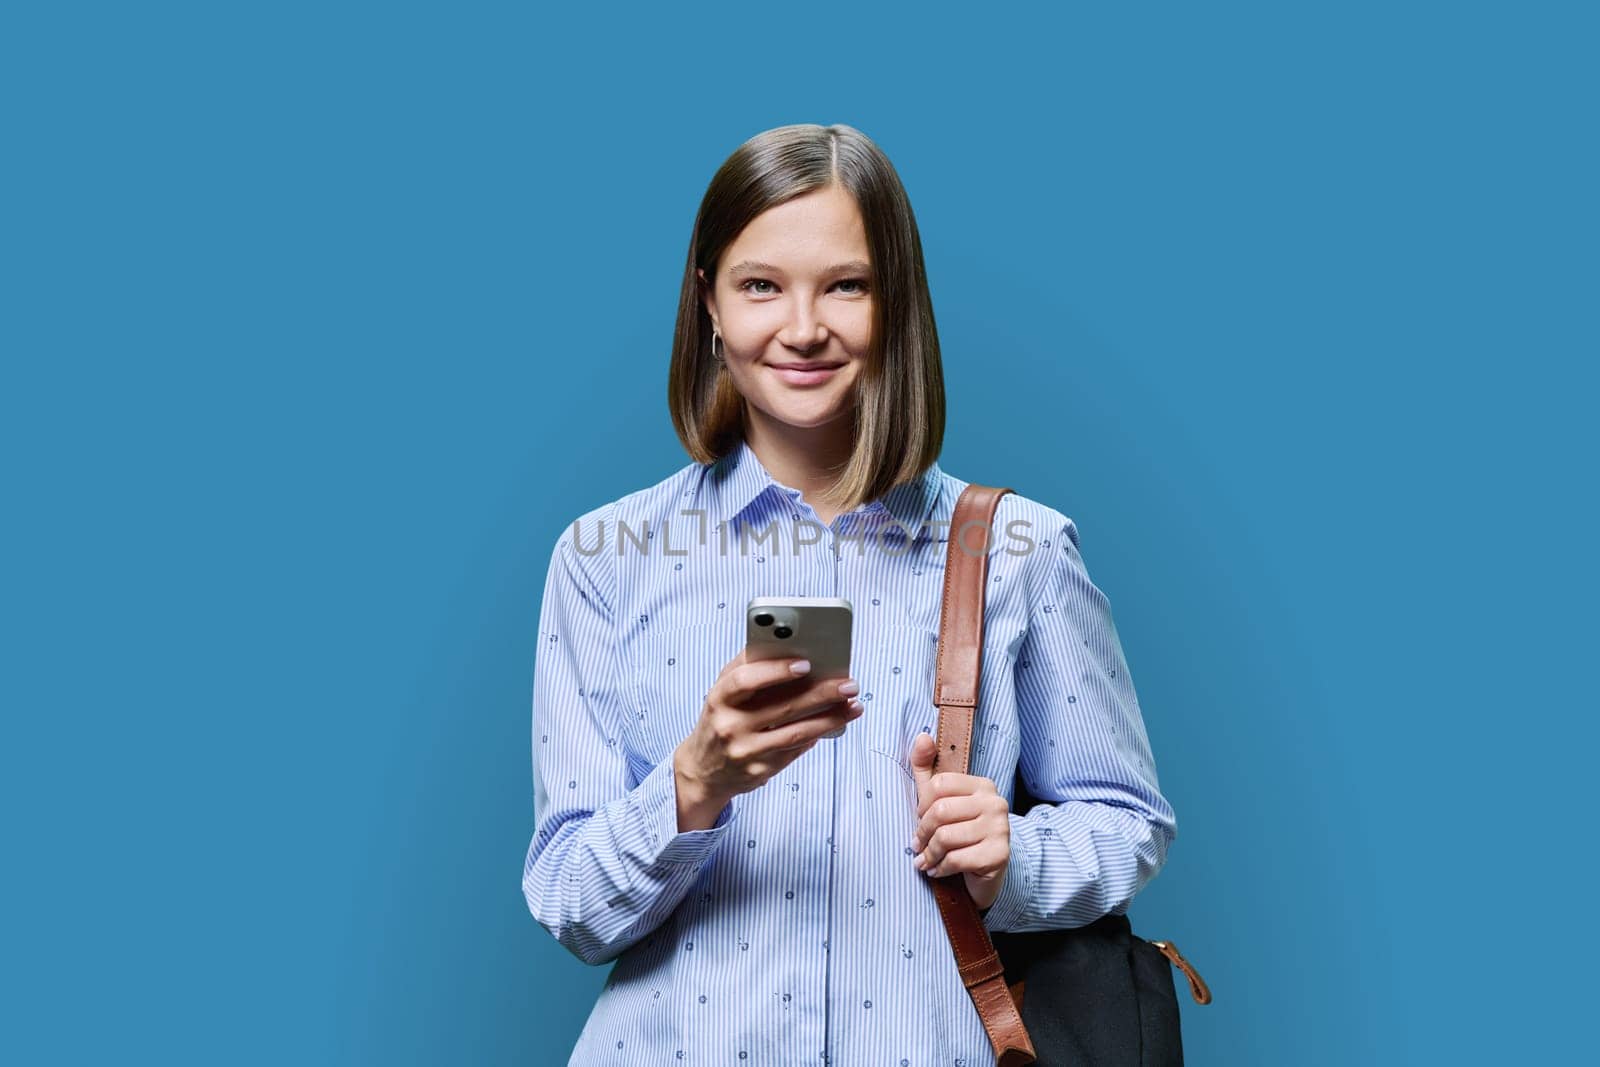 Young woman student with smartphone backpack on blue studio background. Smiling attractive female looking at camera. Using mobile applications apps for work business study leisure, technology, people